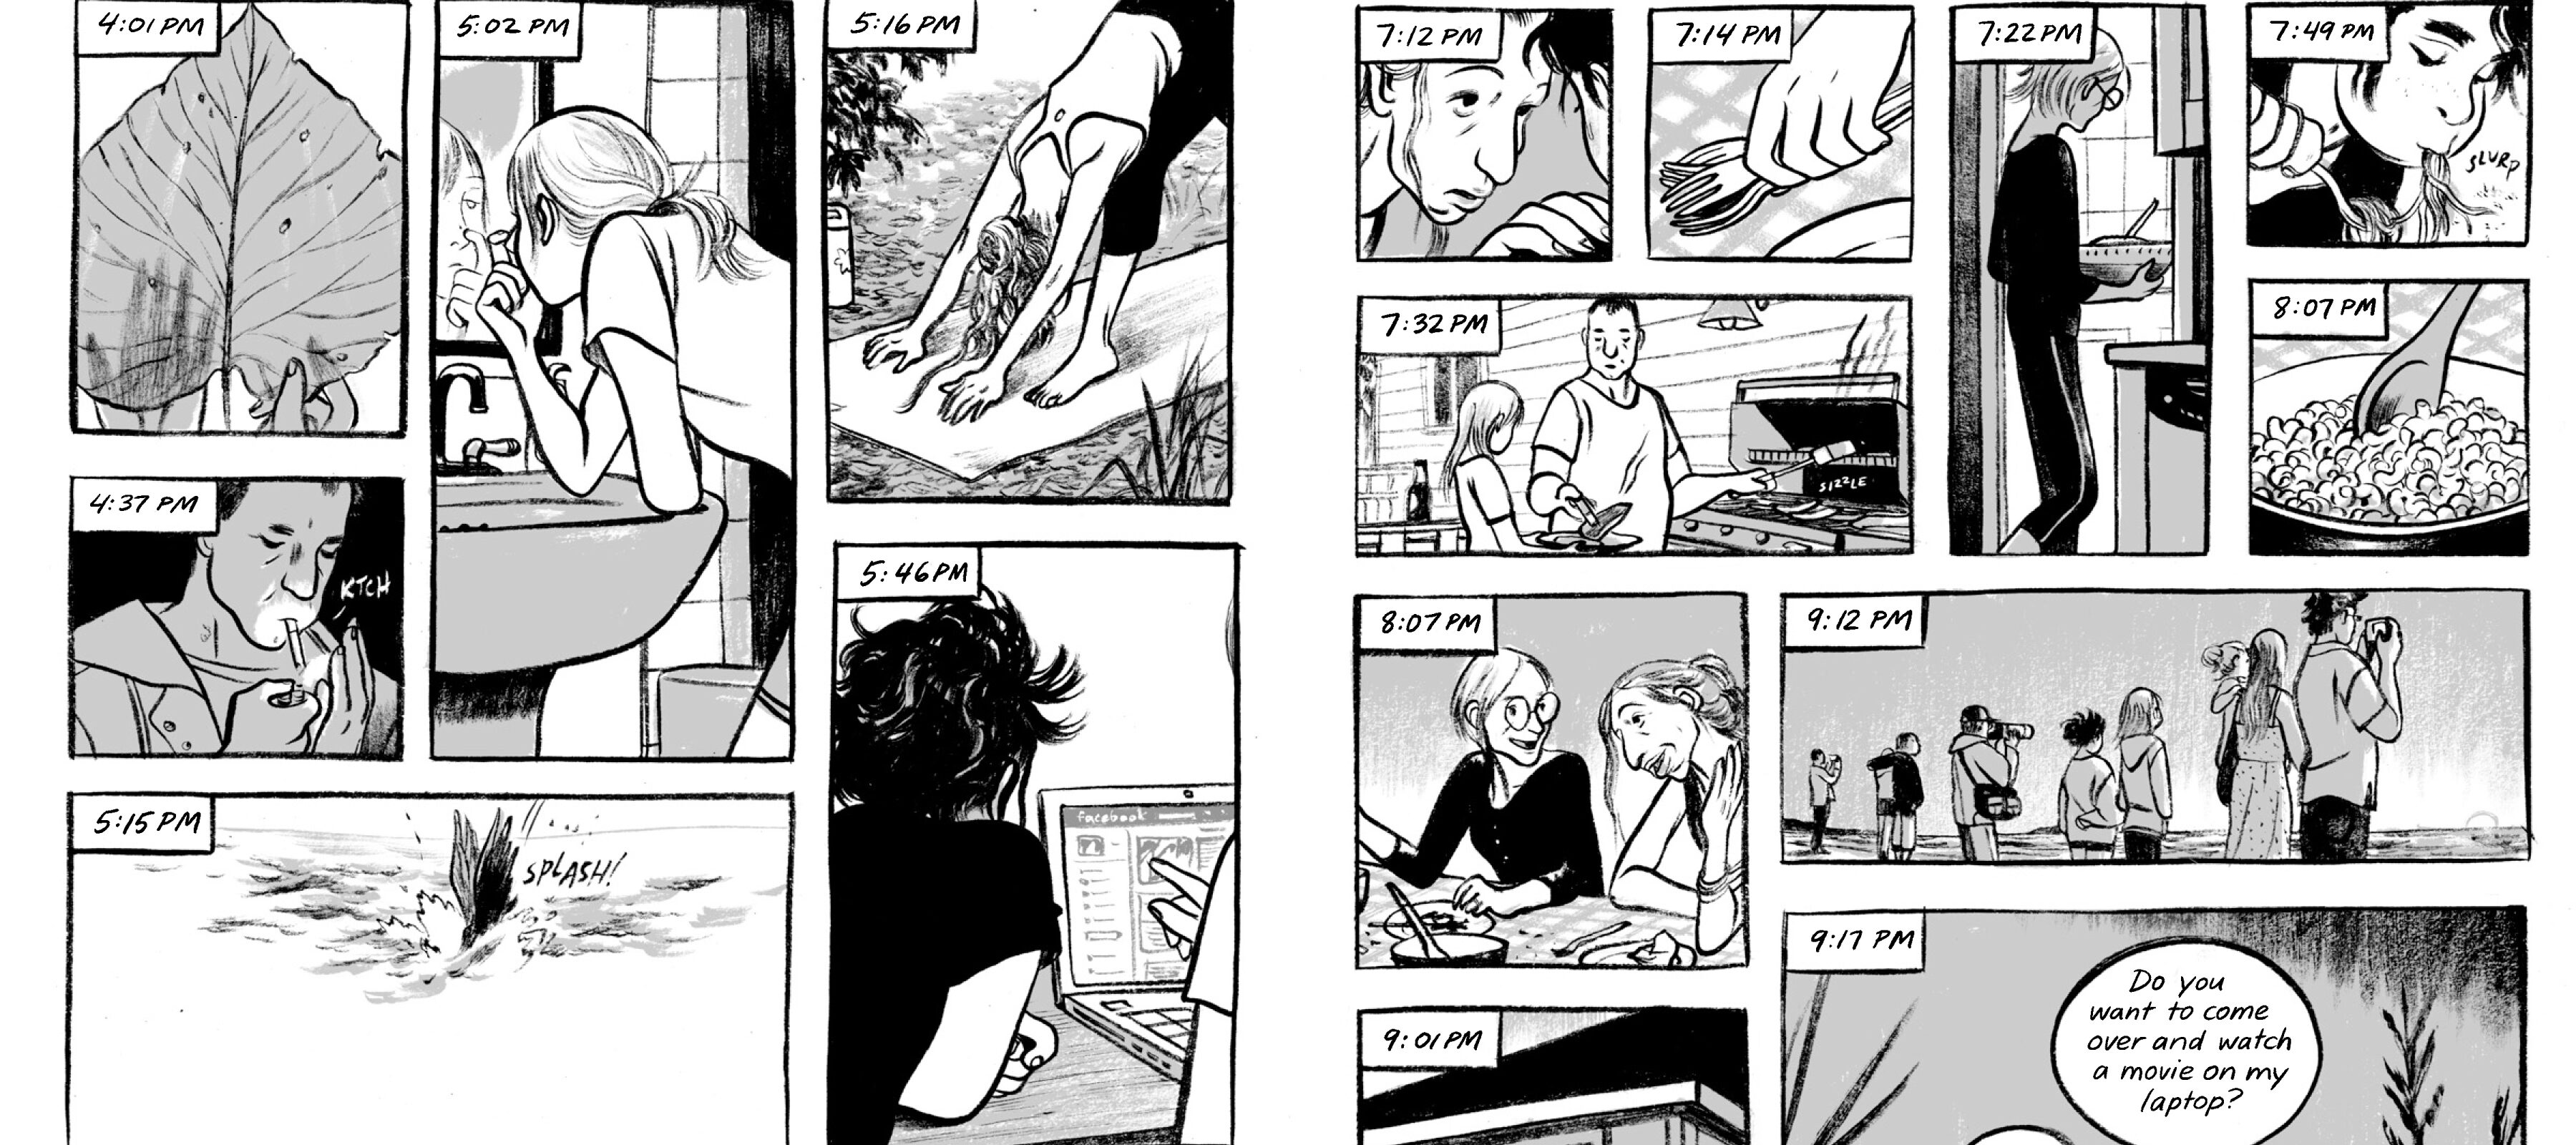 A black-and-white double-page spread of comics that depicts what various people are doing throughout the span of an evening. The people are all light-skinned and performing different activities such as smoking, yoga, reading, writing, barbecuing, and eating.